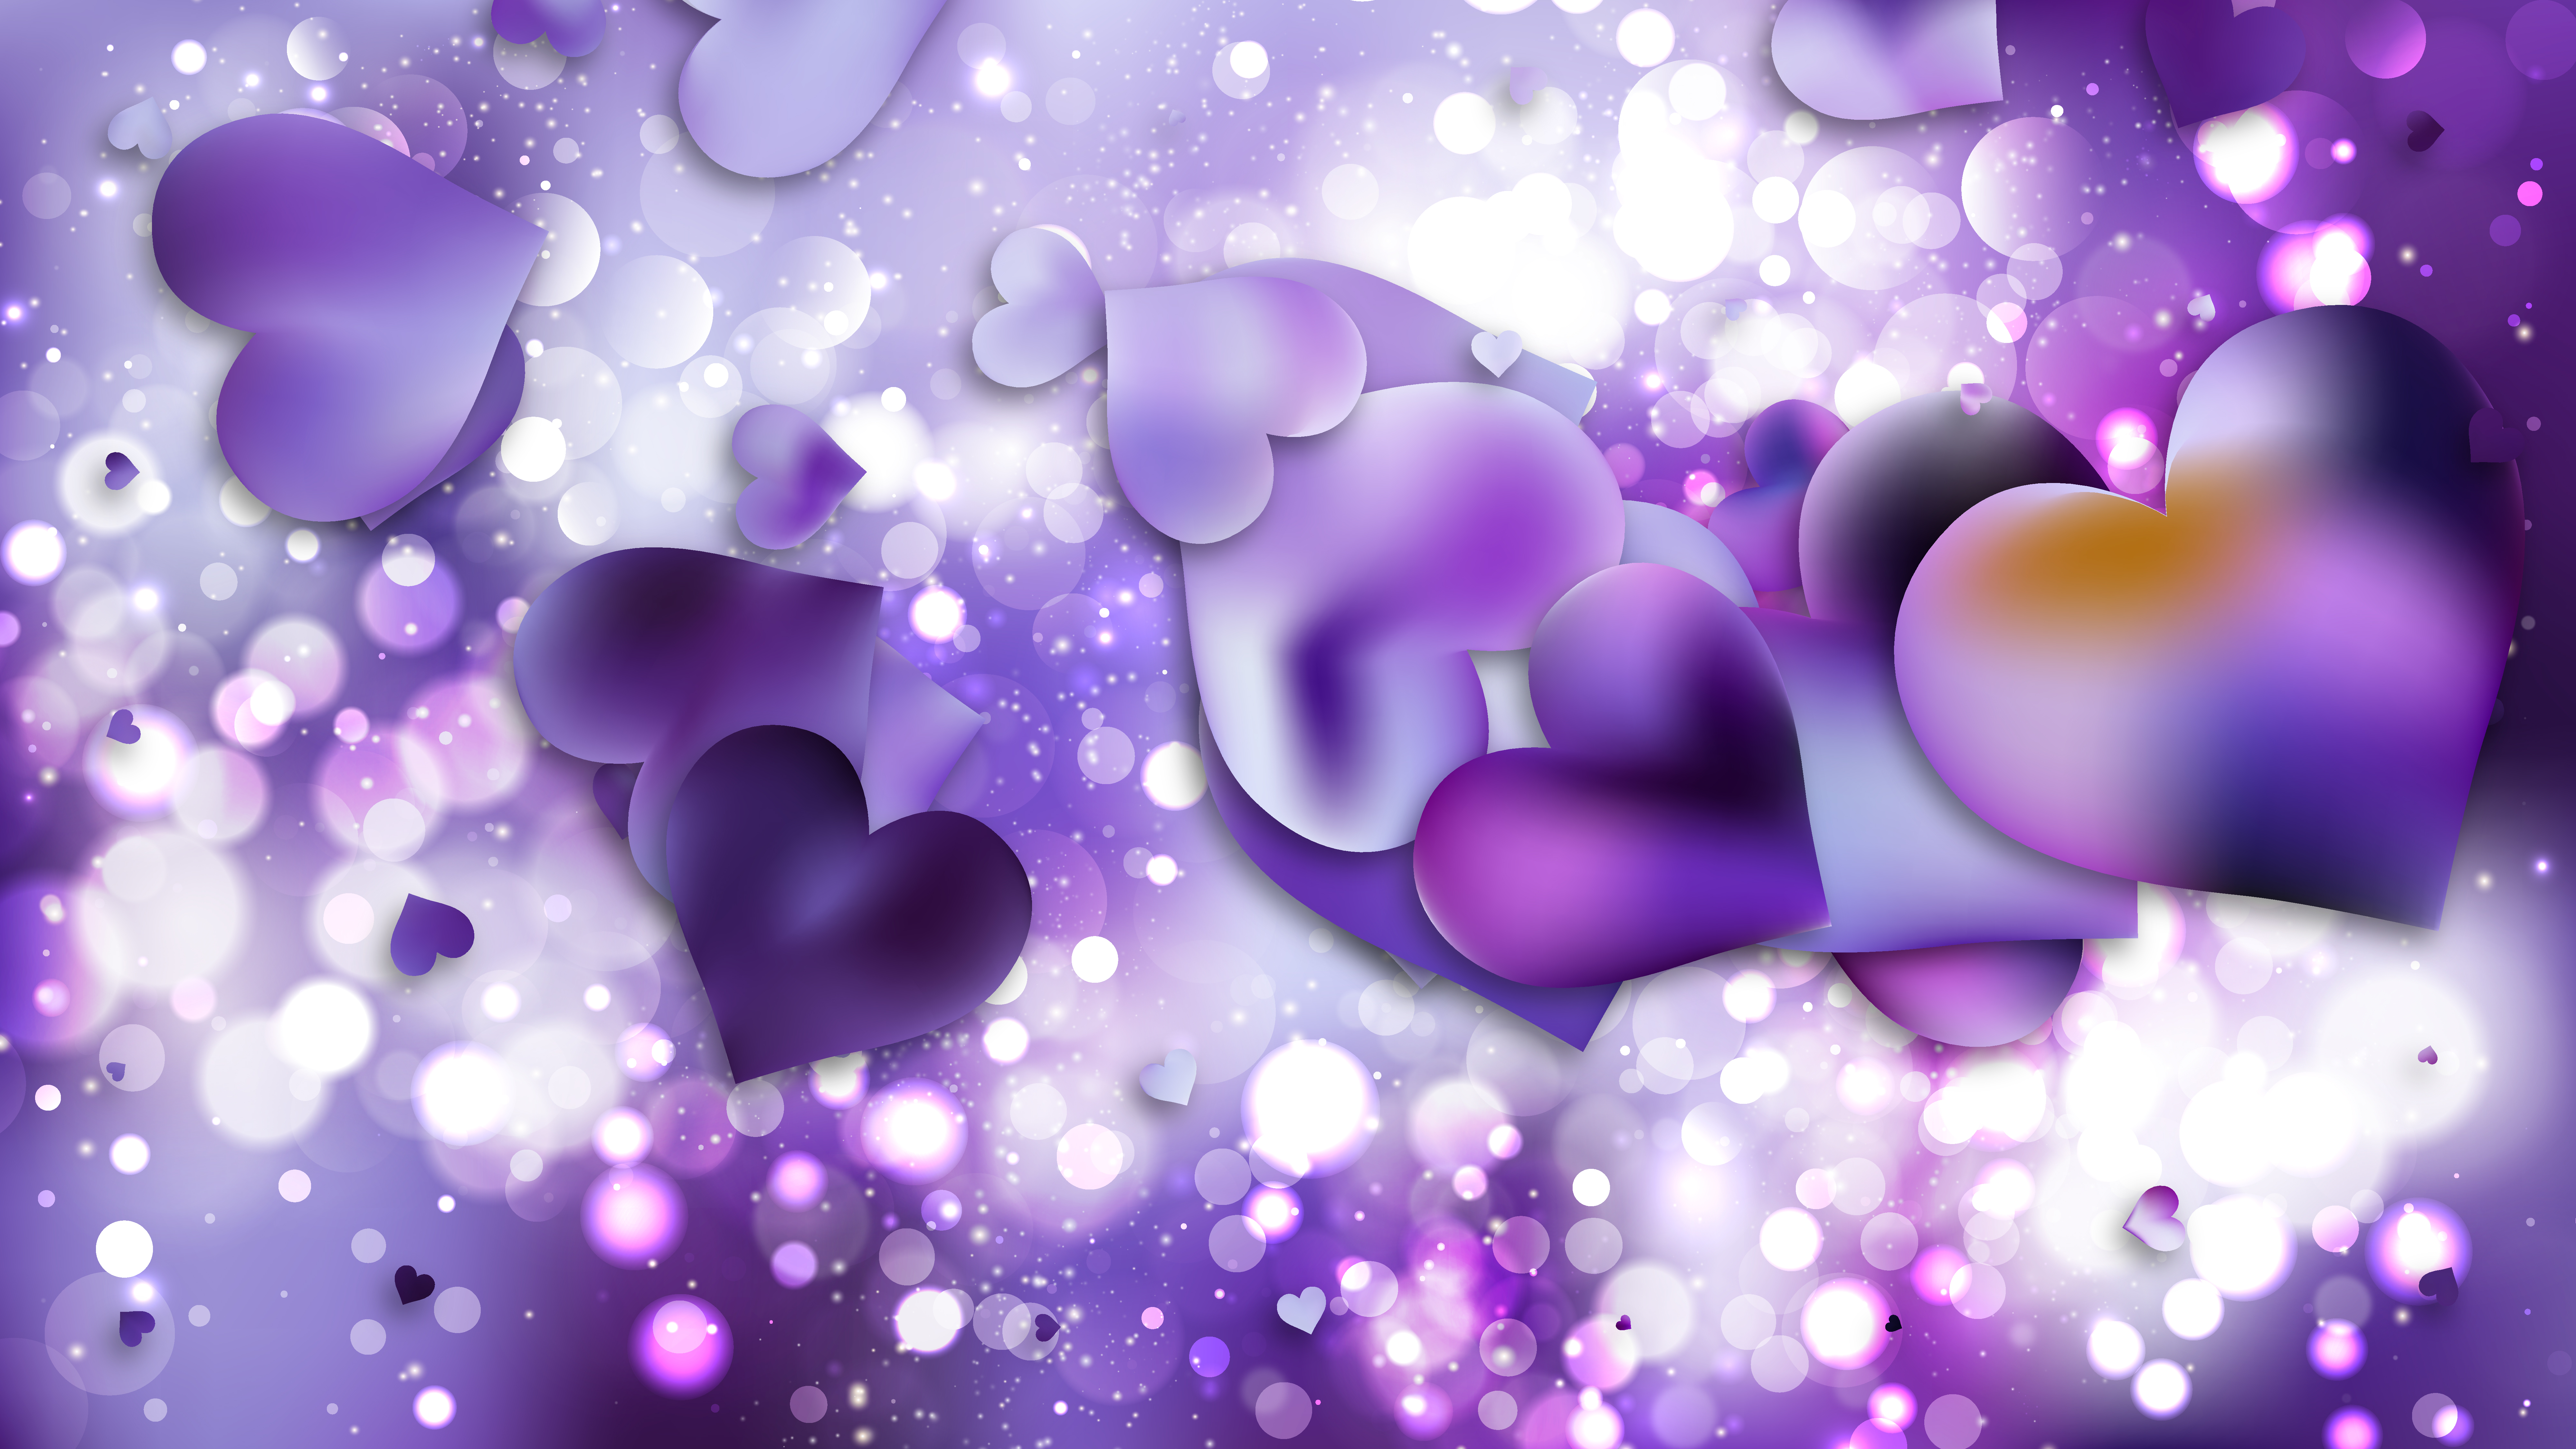 Free Iphone Purple Heart Background - Download in Illustrator, EPS